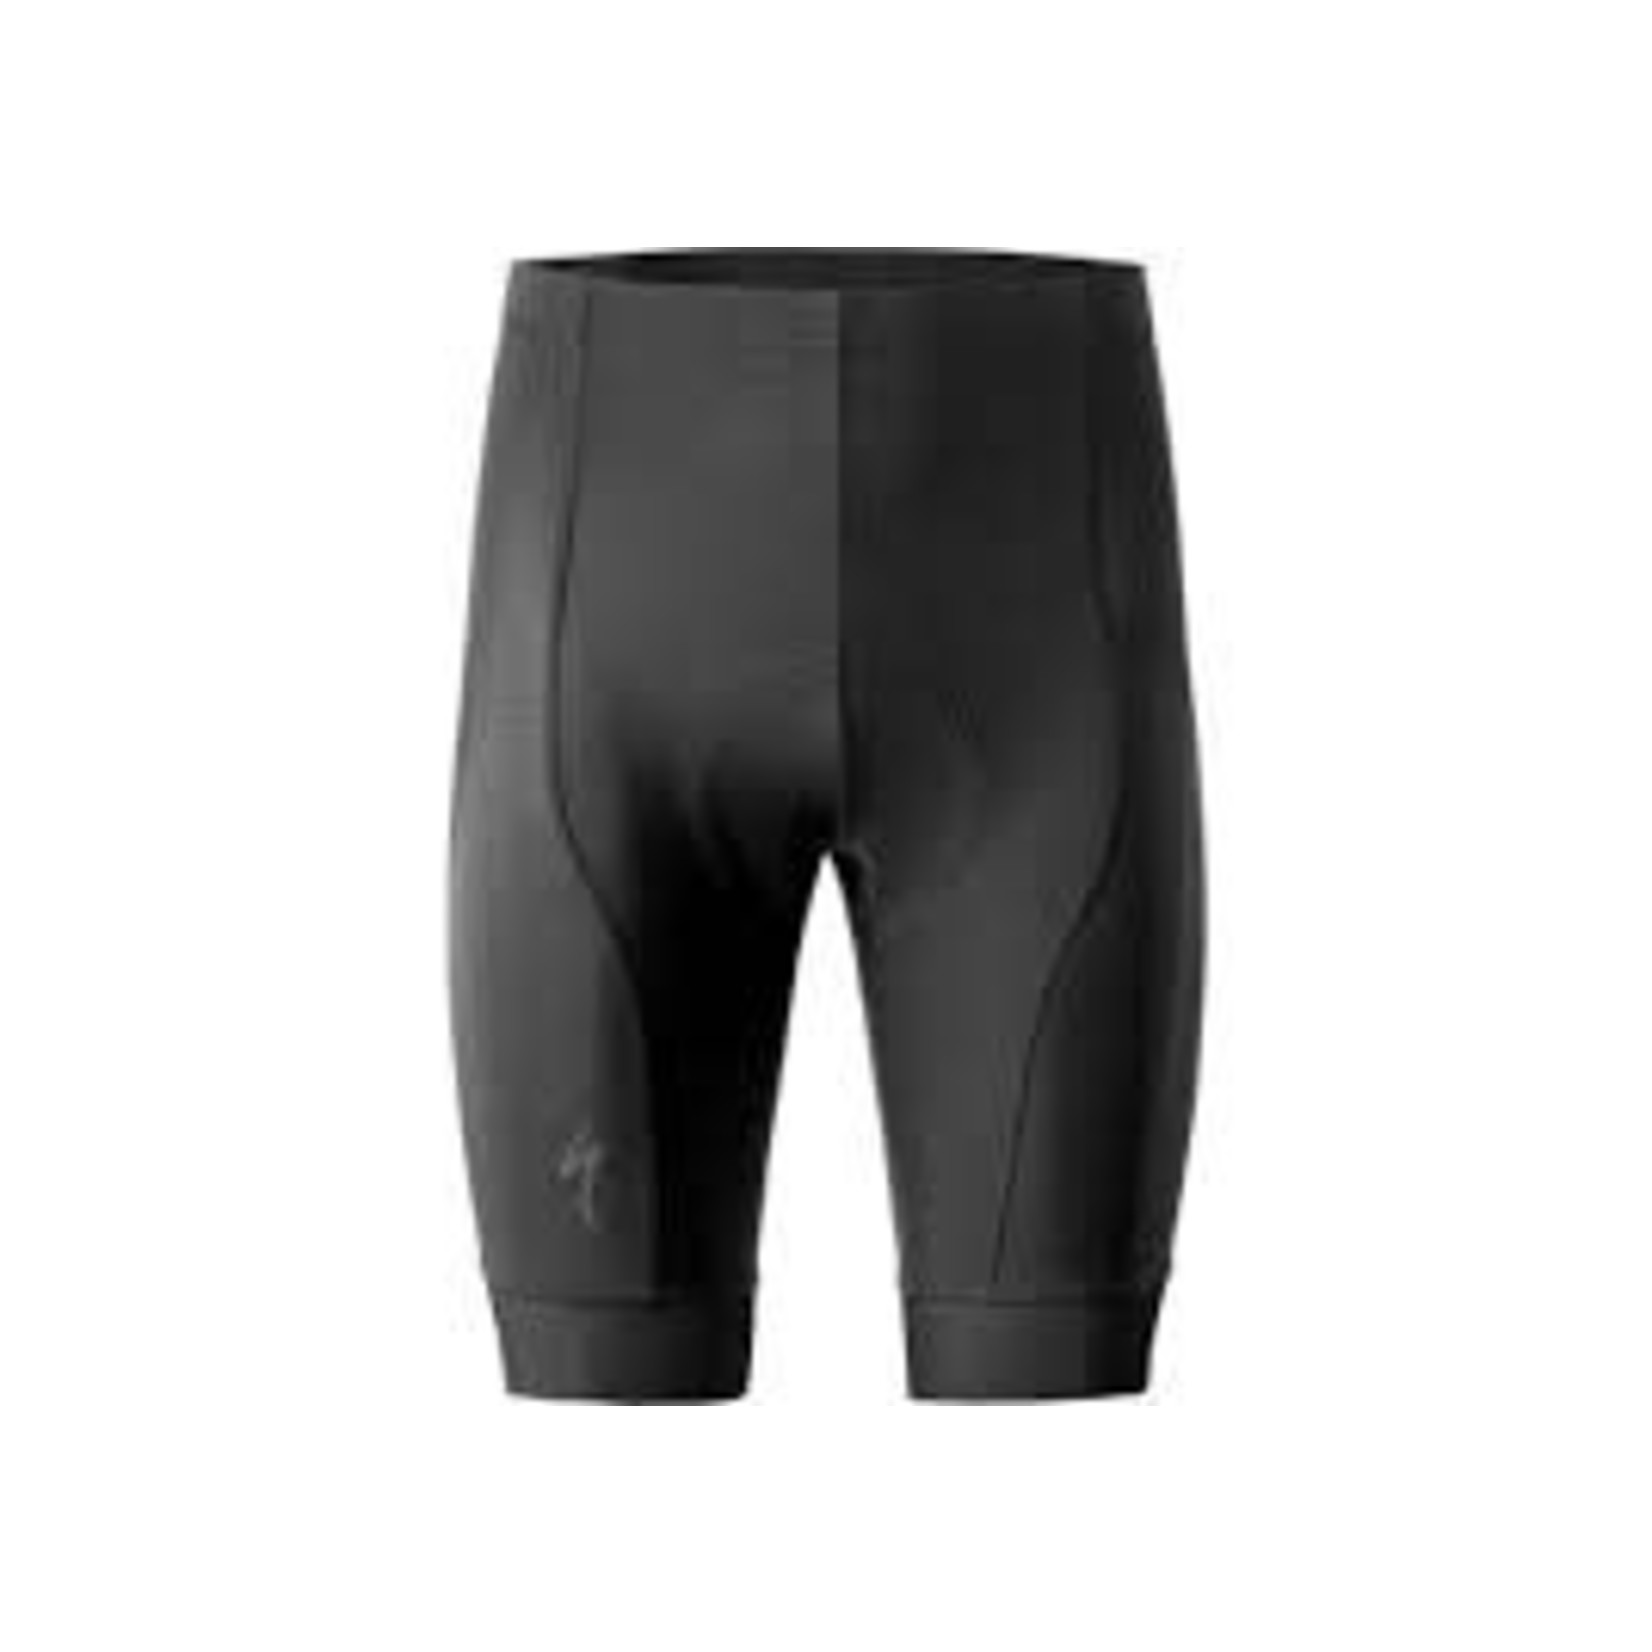 Specialized RBX Short Black - Women's Small